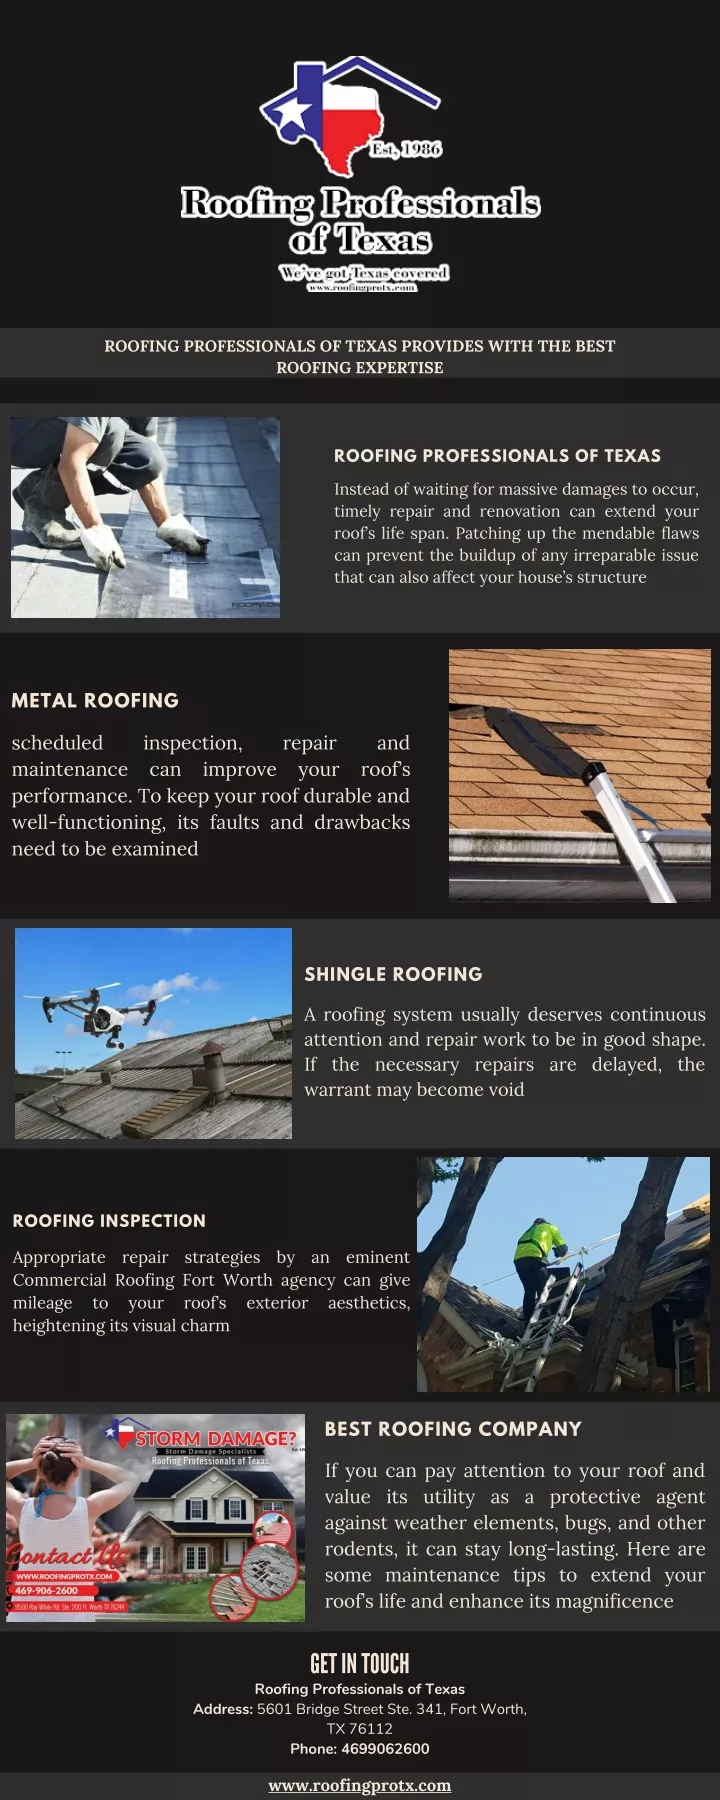 roofing professionals of texas provides with